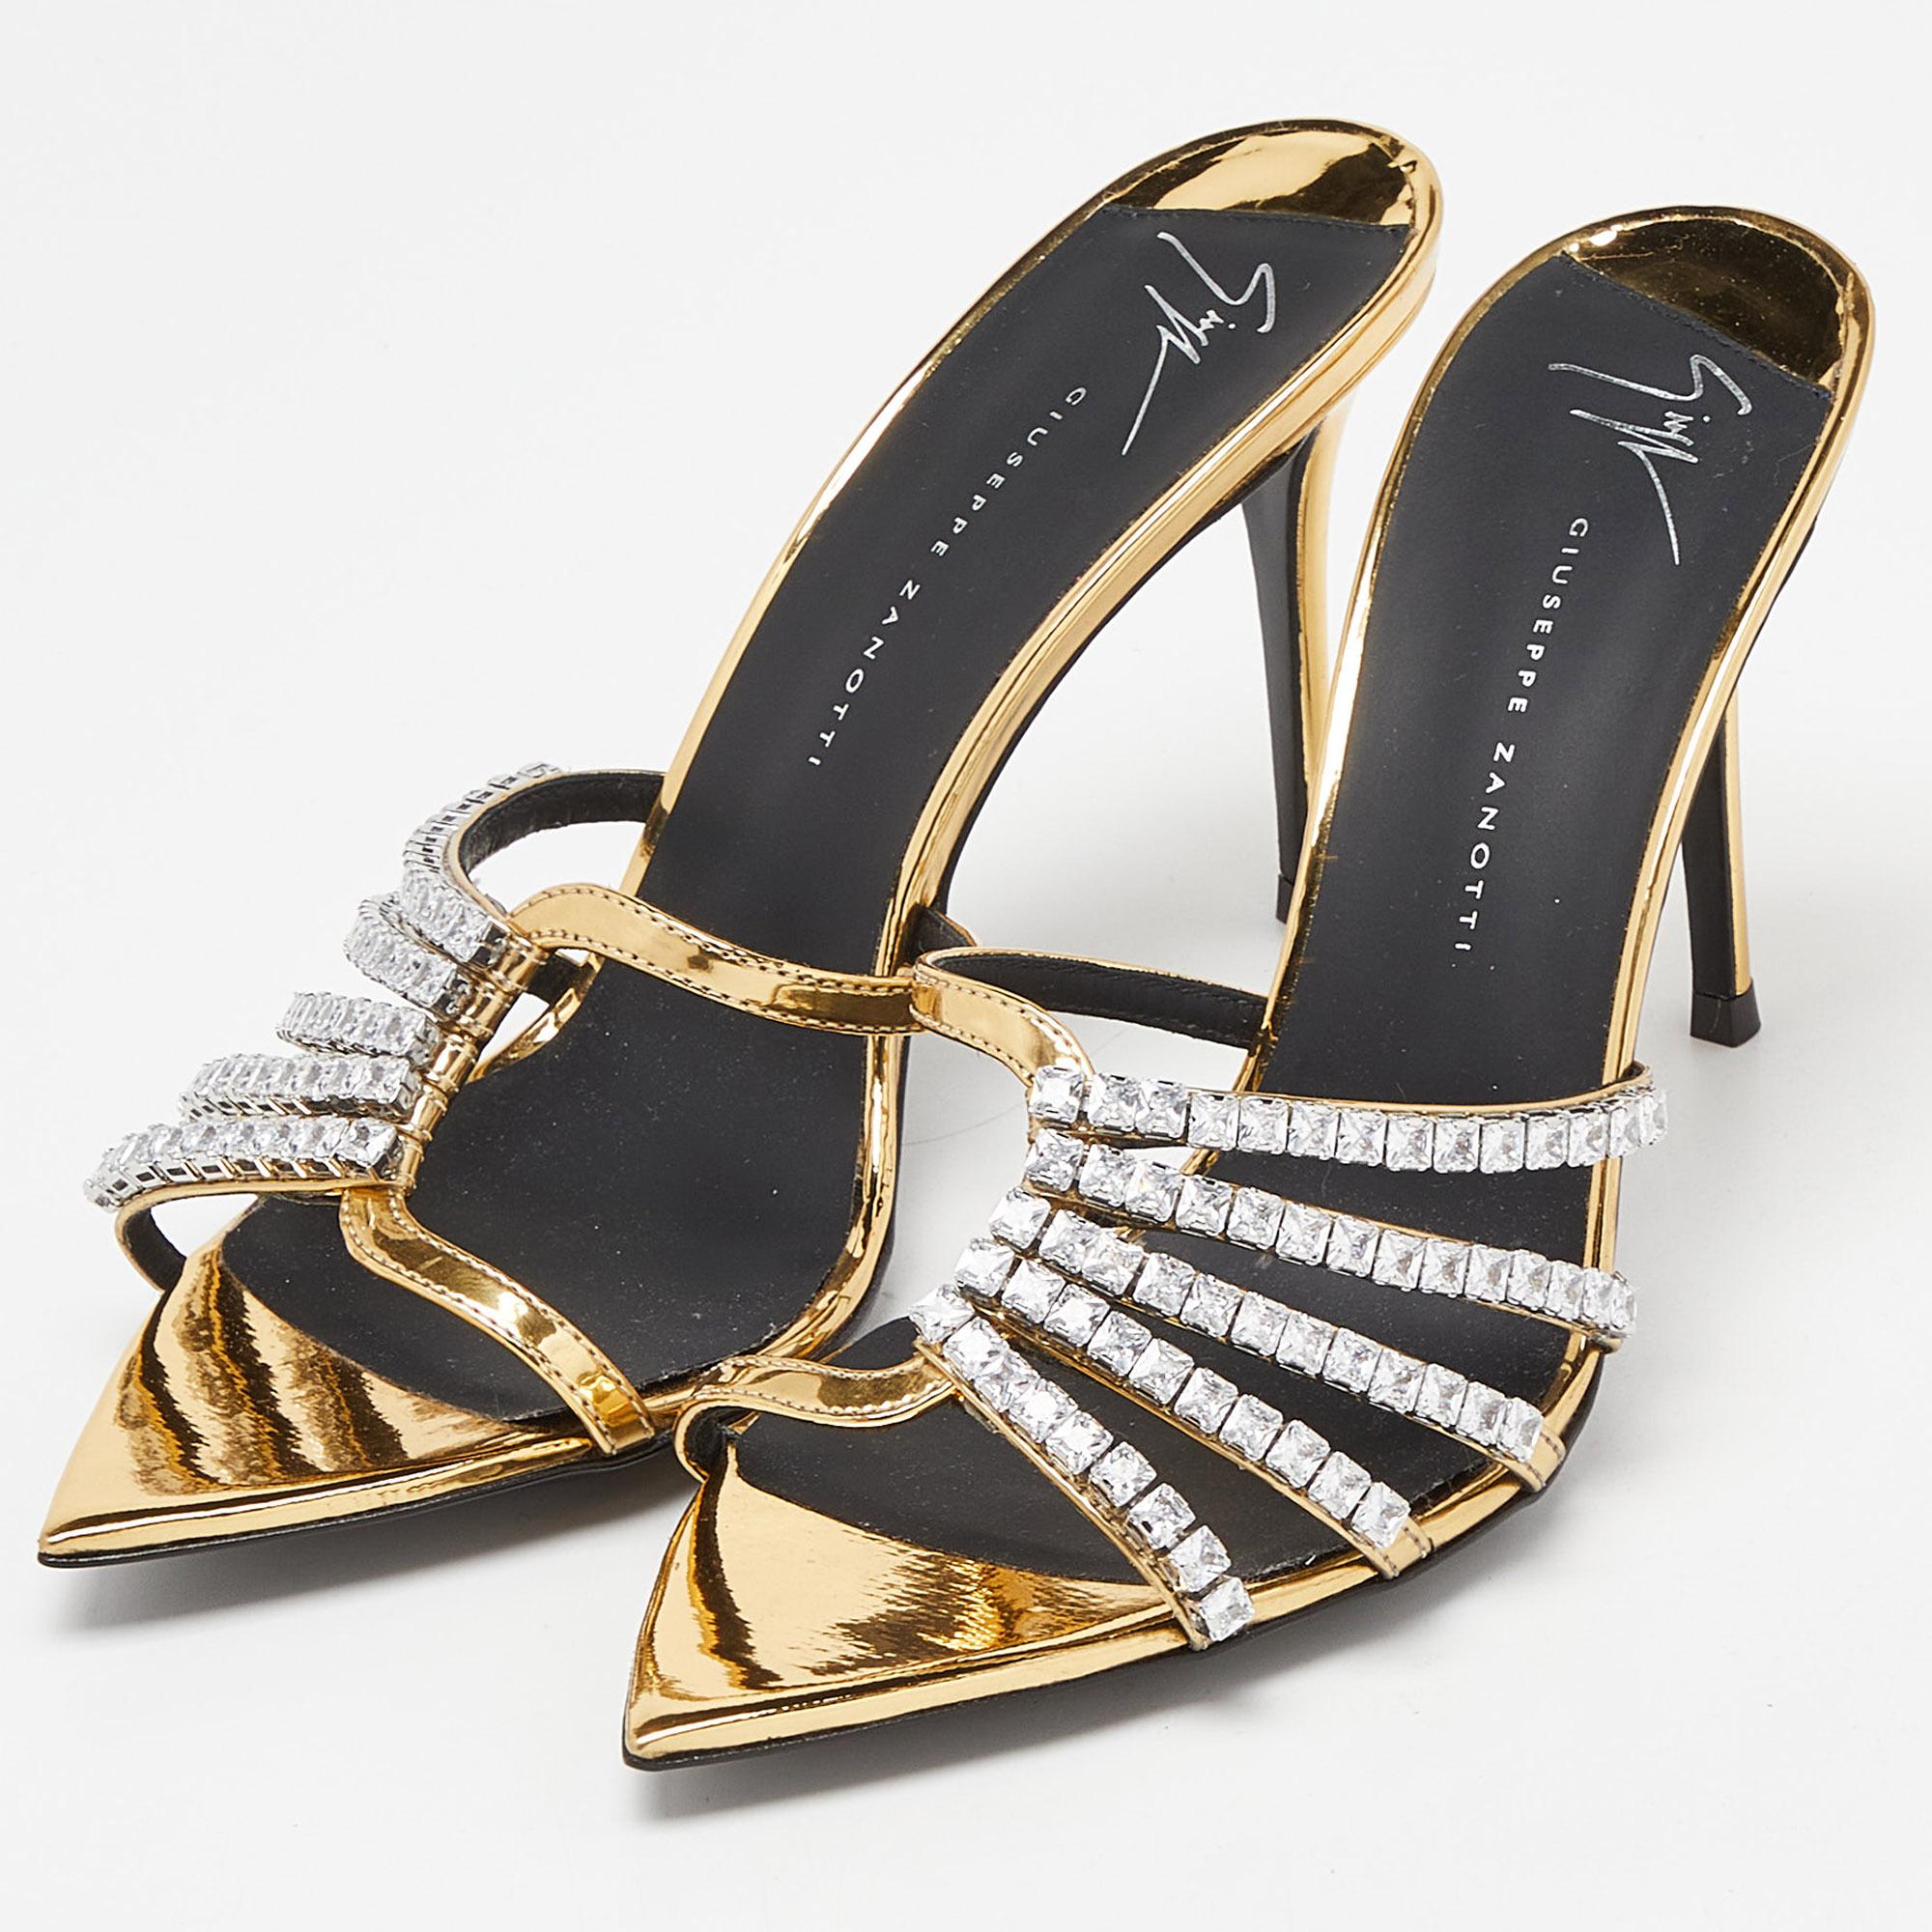 The crystal embellishment on the black upper of these Giuseppe Zanotti sandals adds an instant dose of glam to them. Made from suede, they are teamed with leather soles, a slip-on fitting, and 9 cm heels.

Includes: Original Dustbag